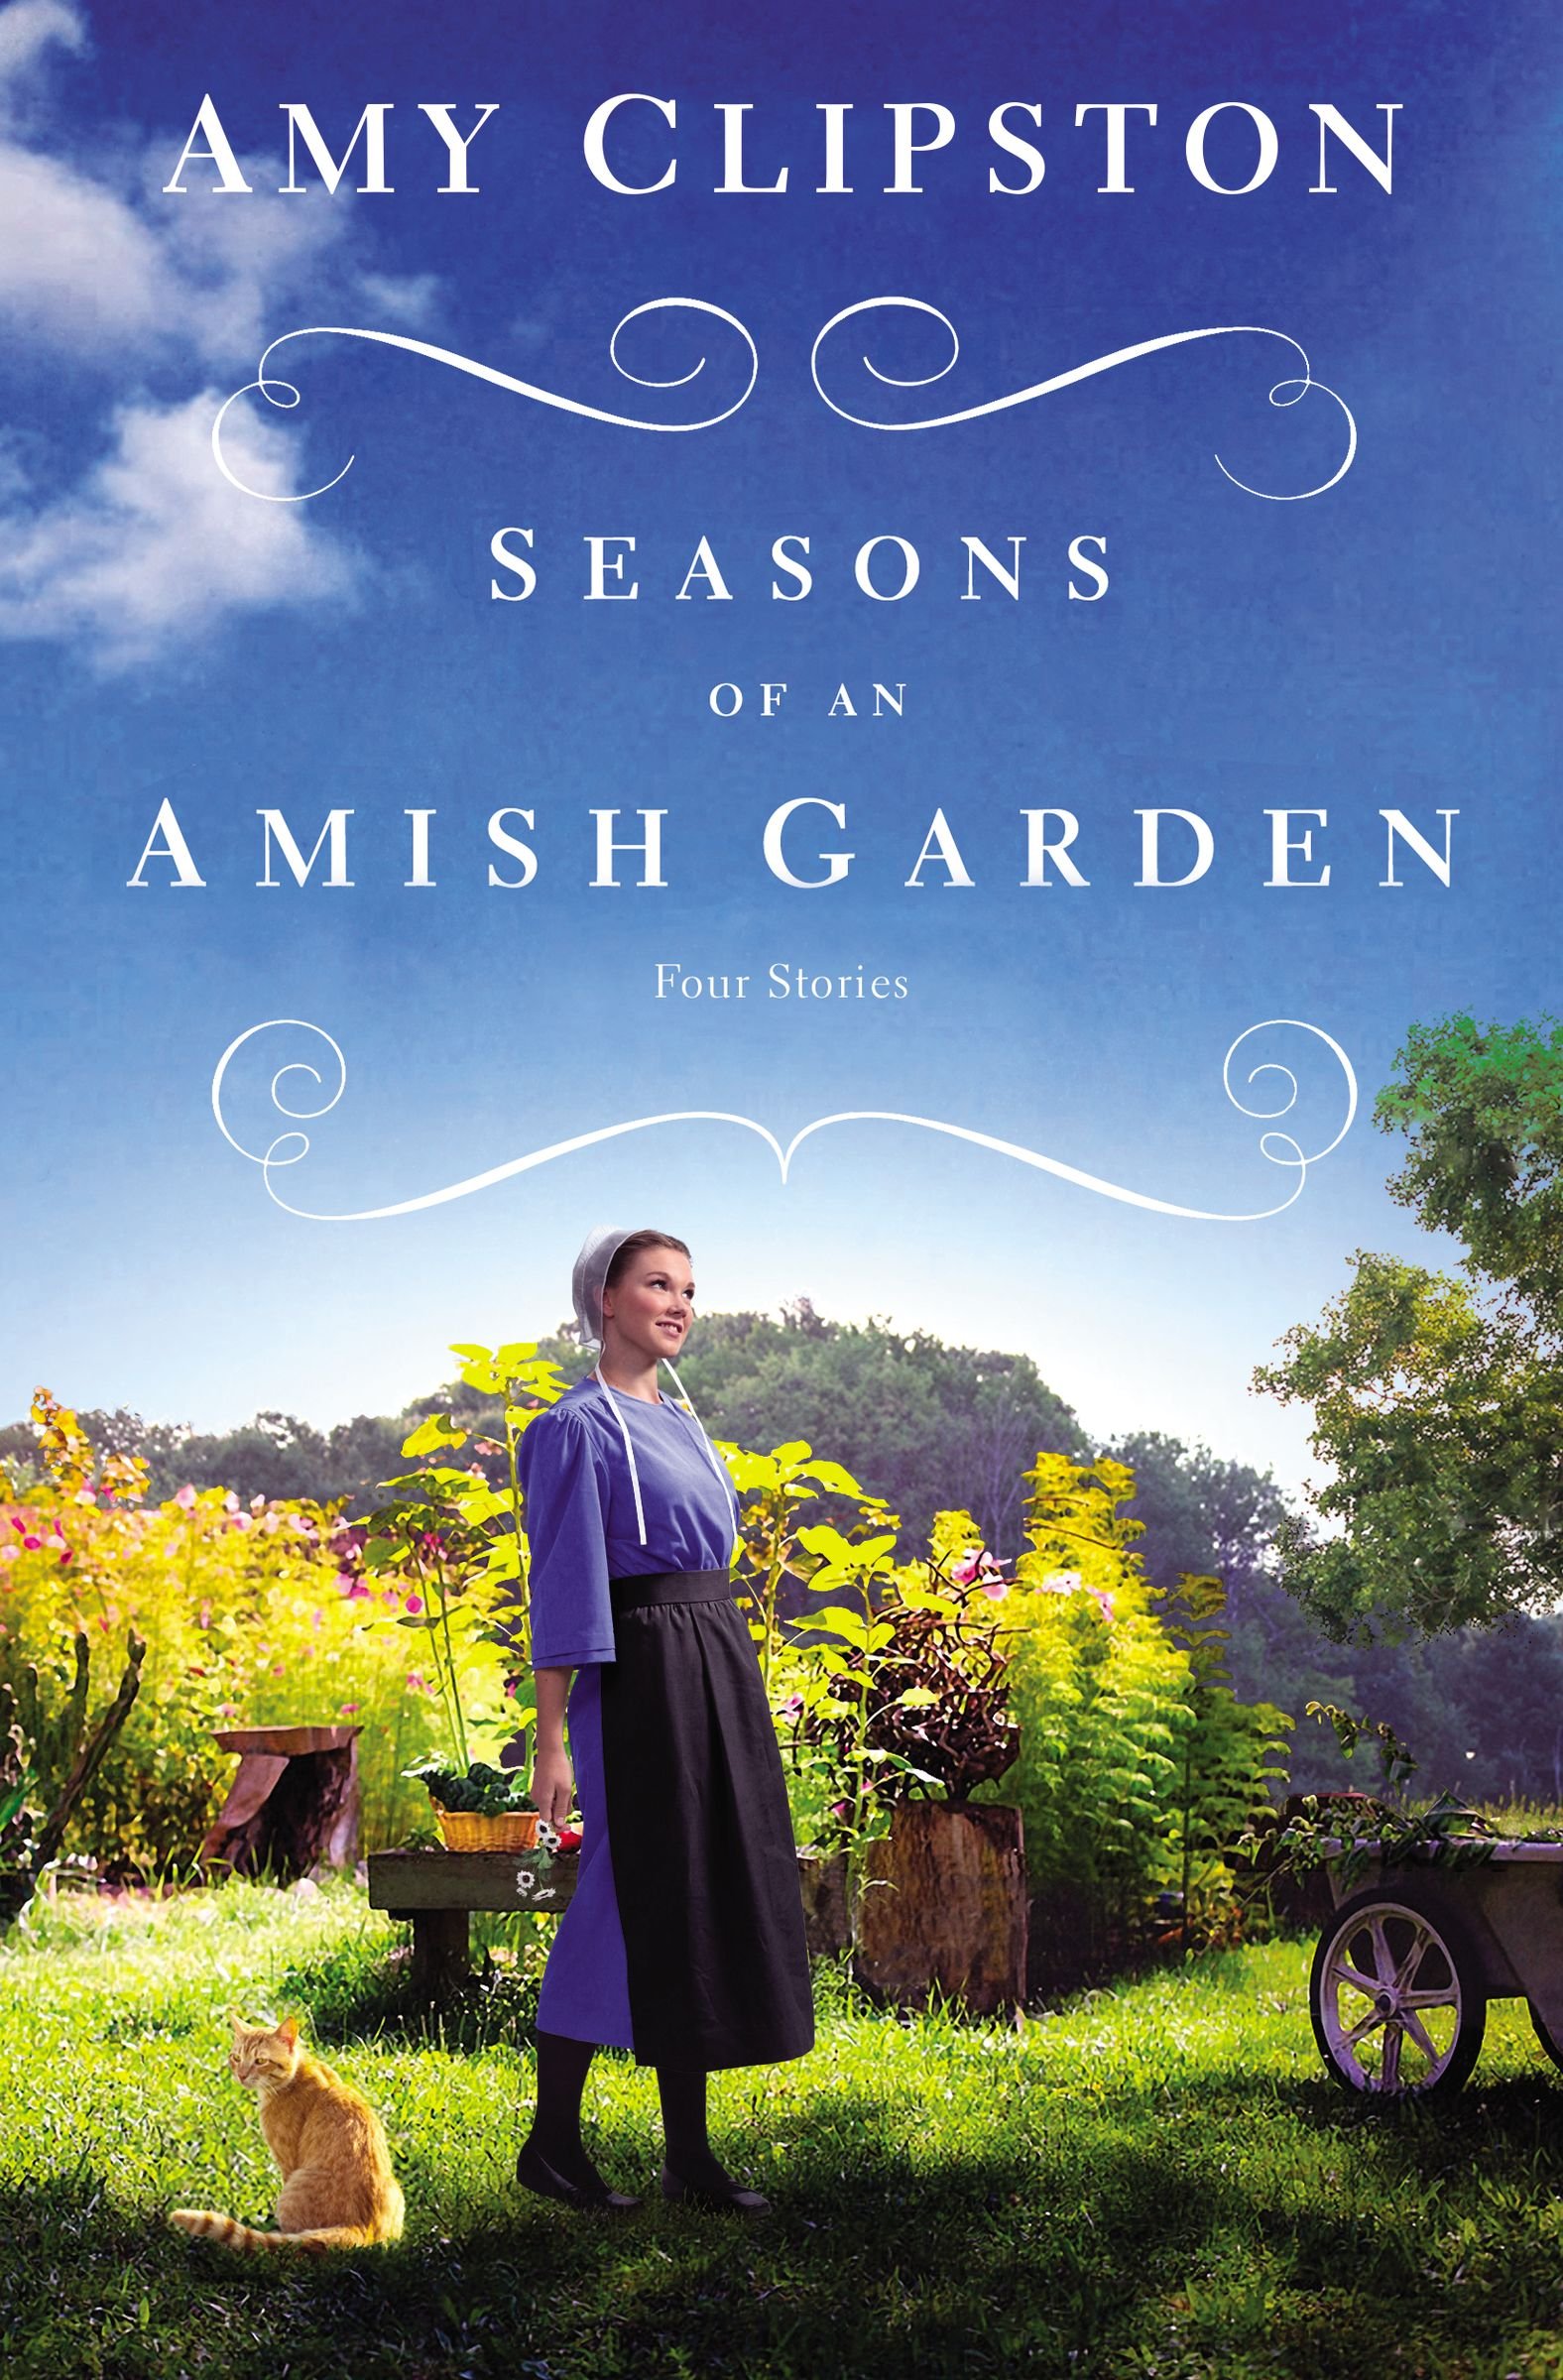 Image for "Seasons of an Amish Garden"